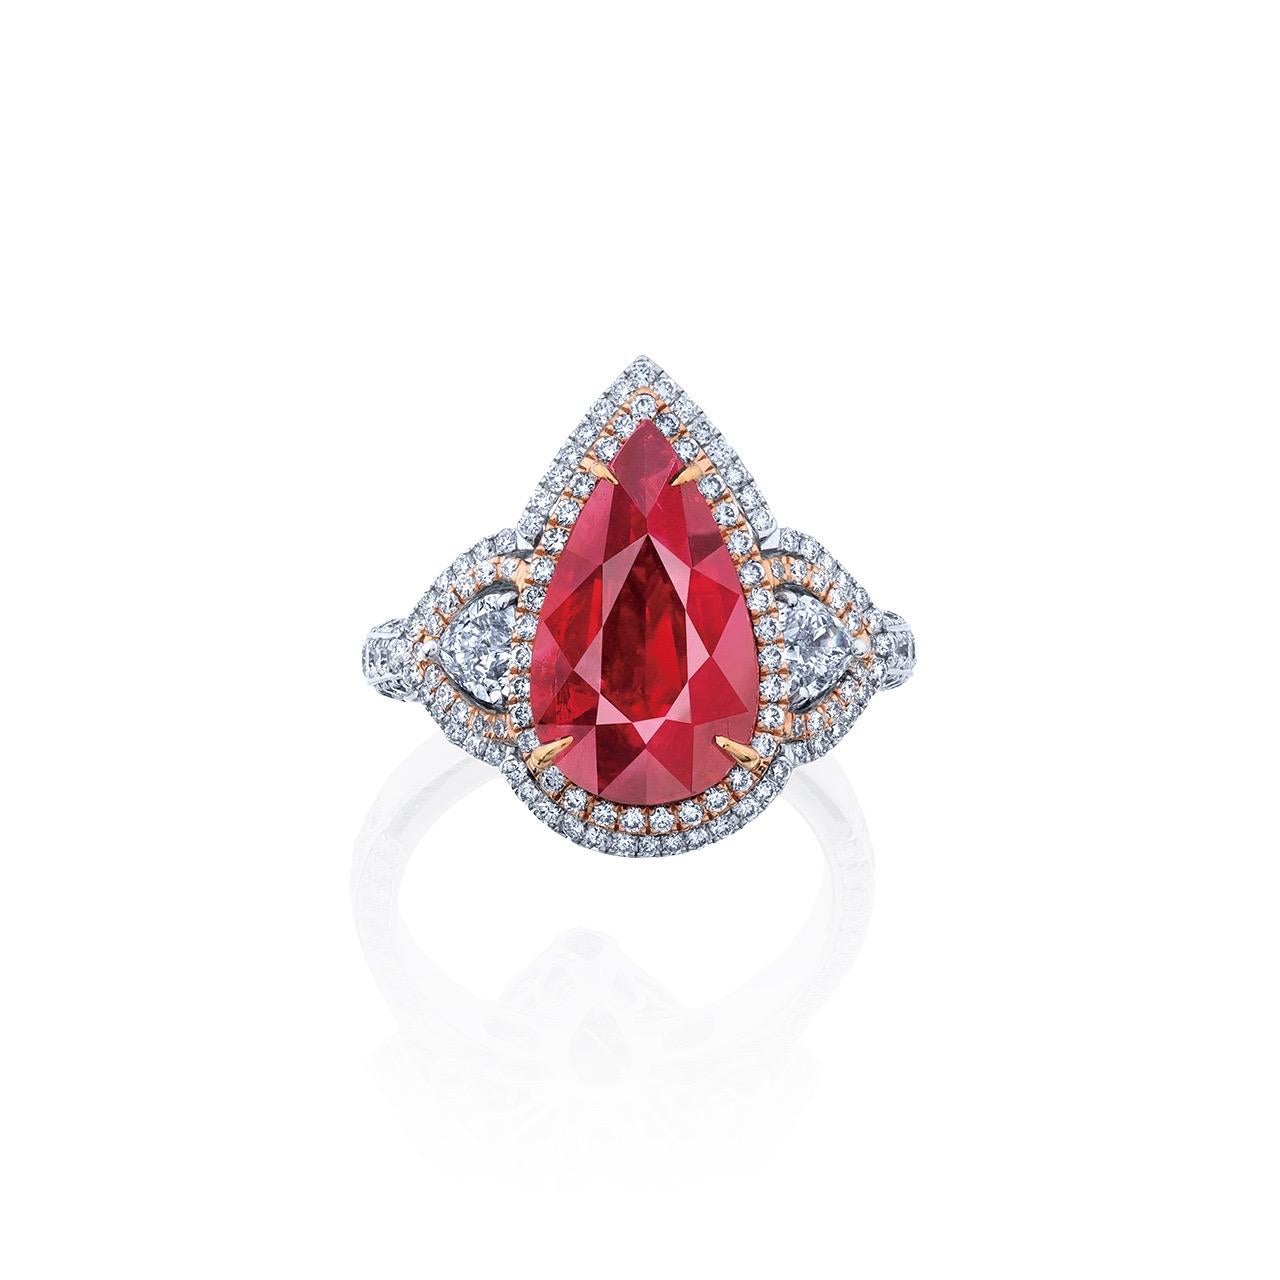 From Emilio Jewelry, a well known and respected wholesaler/dealer located on New York’s iconic Fifth Avenue, 
Center: 4.40ct + Mozambique Ruby, Untreated Vivid Red 
Please inquire for more images, certificates, details, and any questions. Please